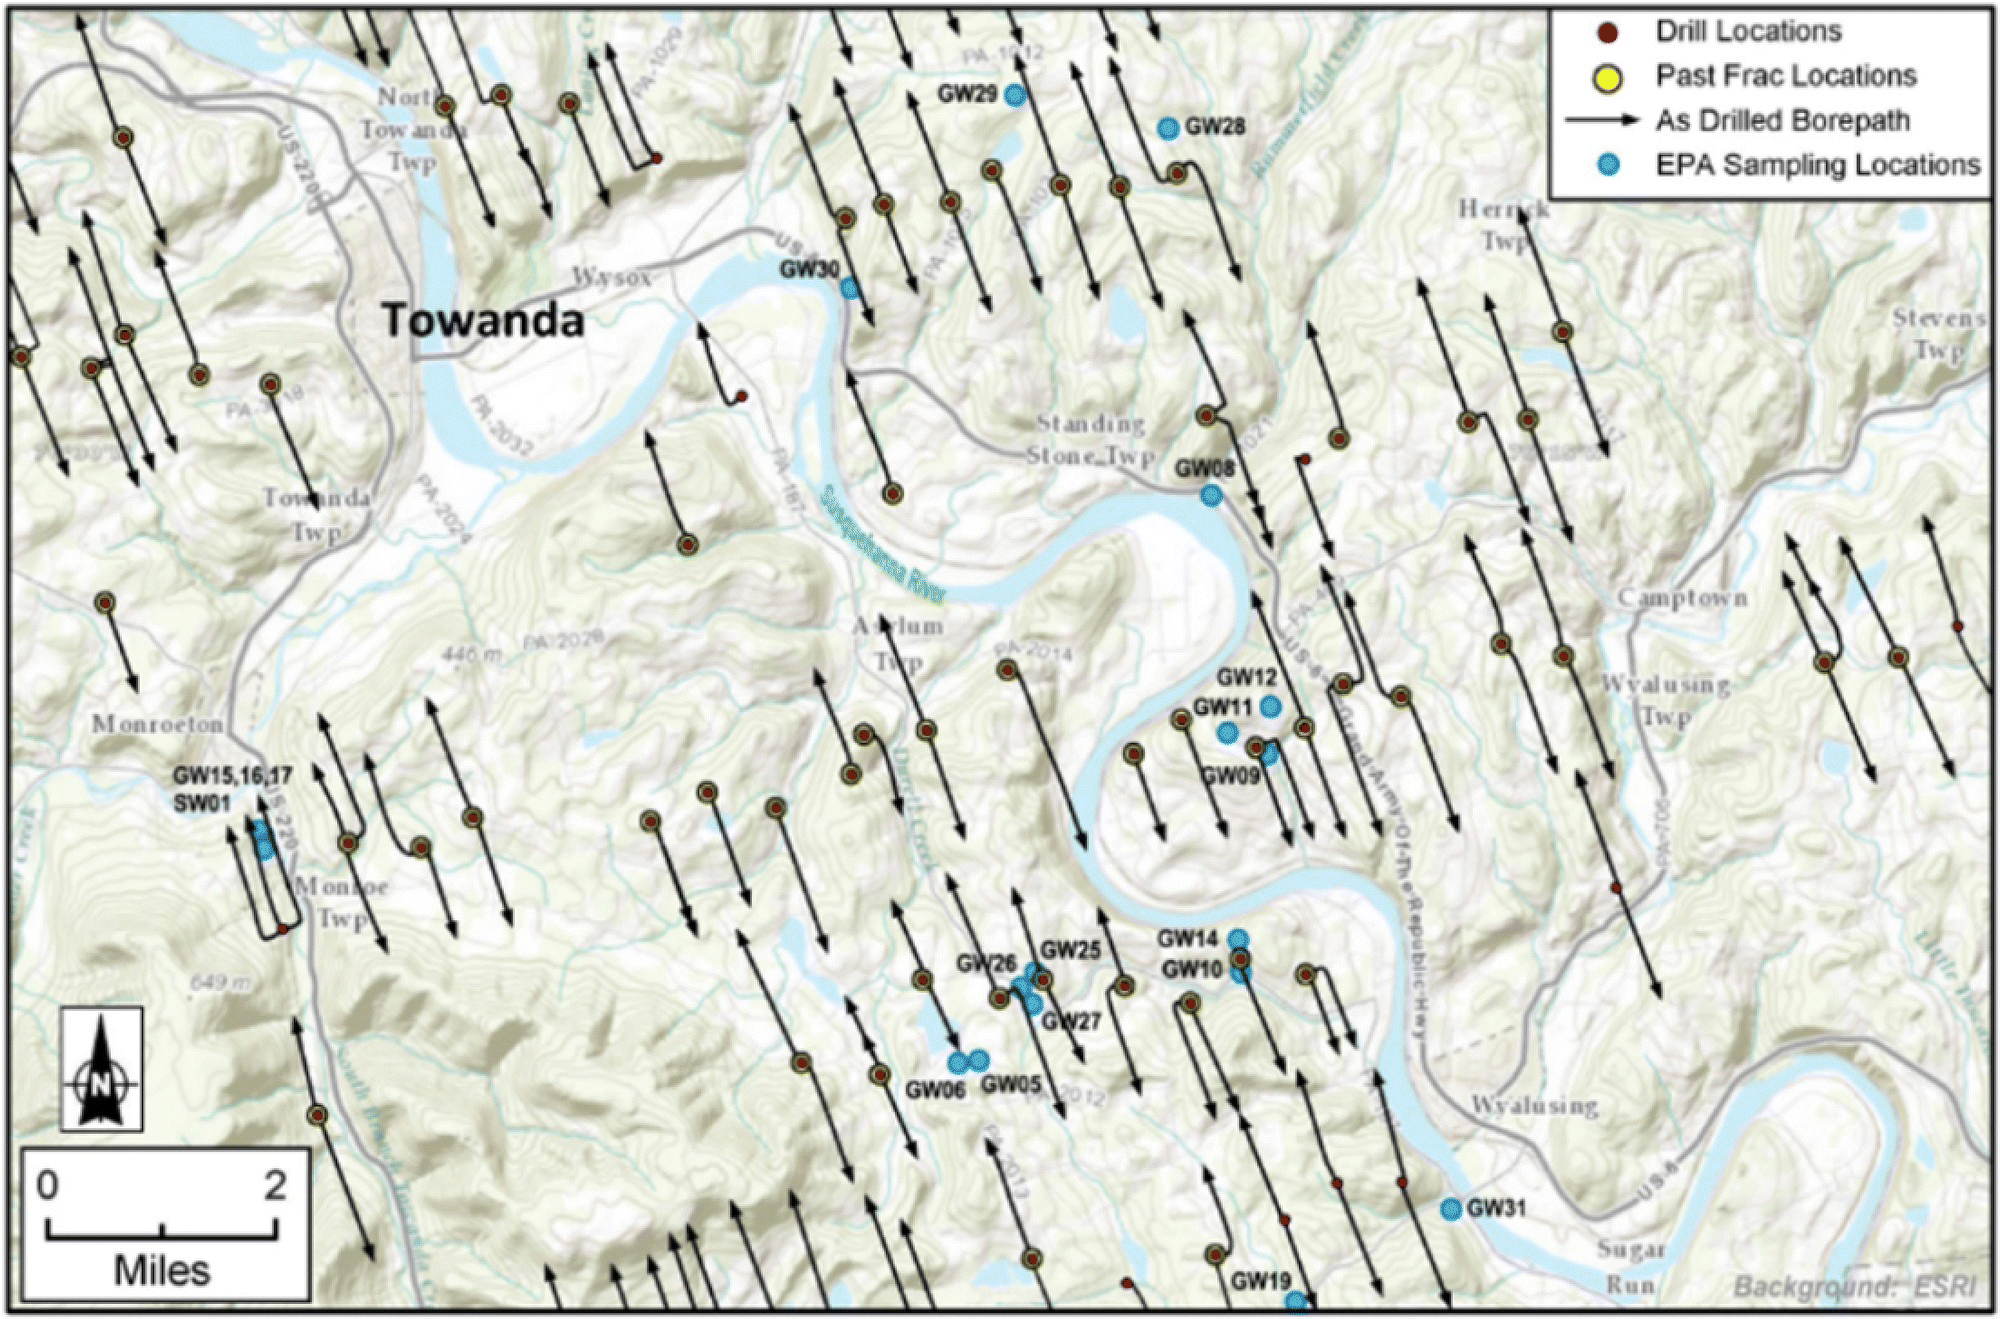 Map depicting north–northwest and south–southeast orientation of gas well laterals in Towanda area of Bradford County as of February 2012, with circles marking the drill, past frac, and EPA sampling locations.